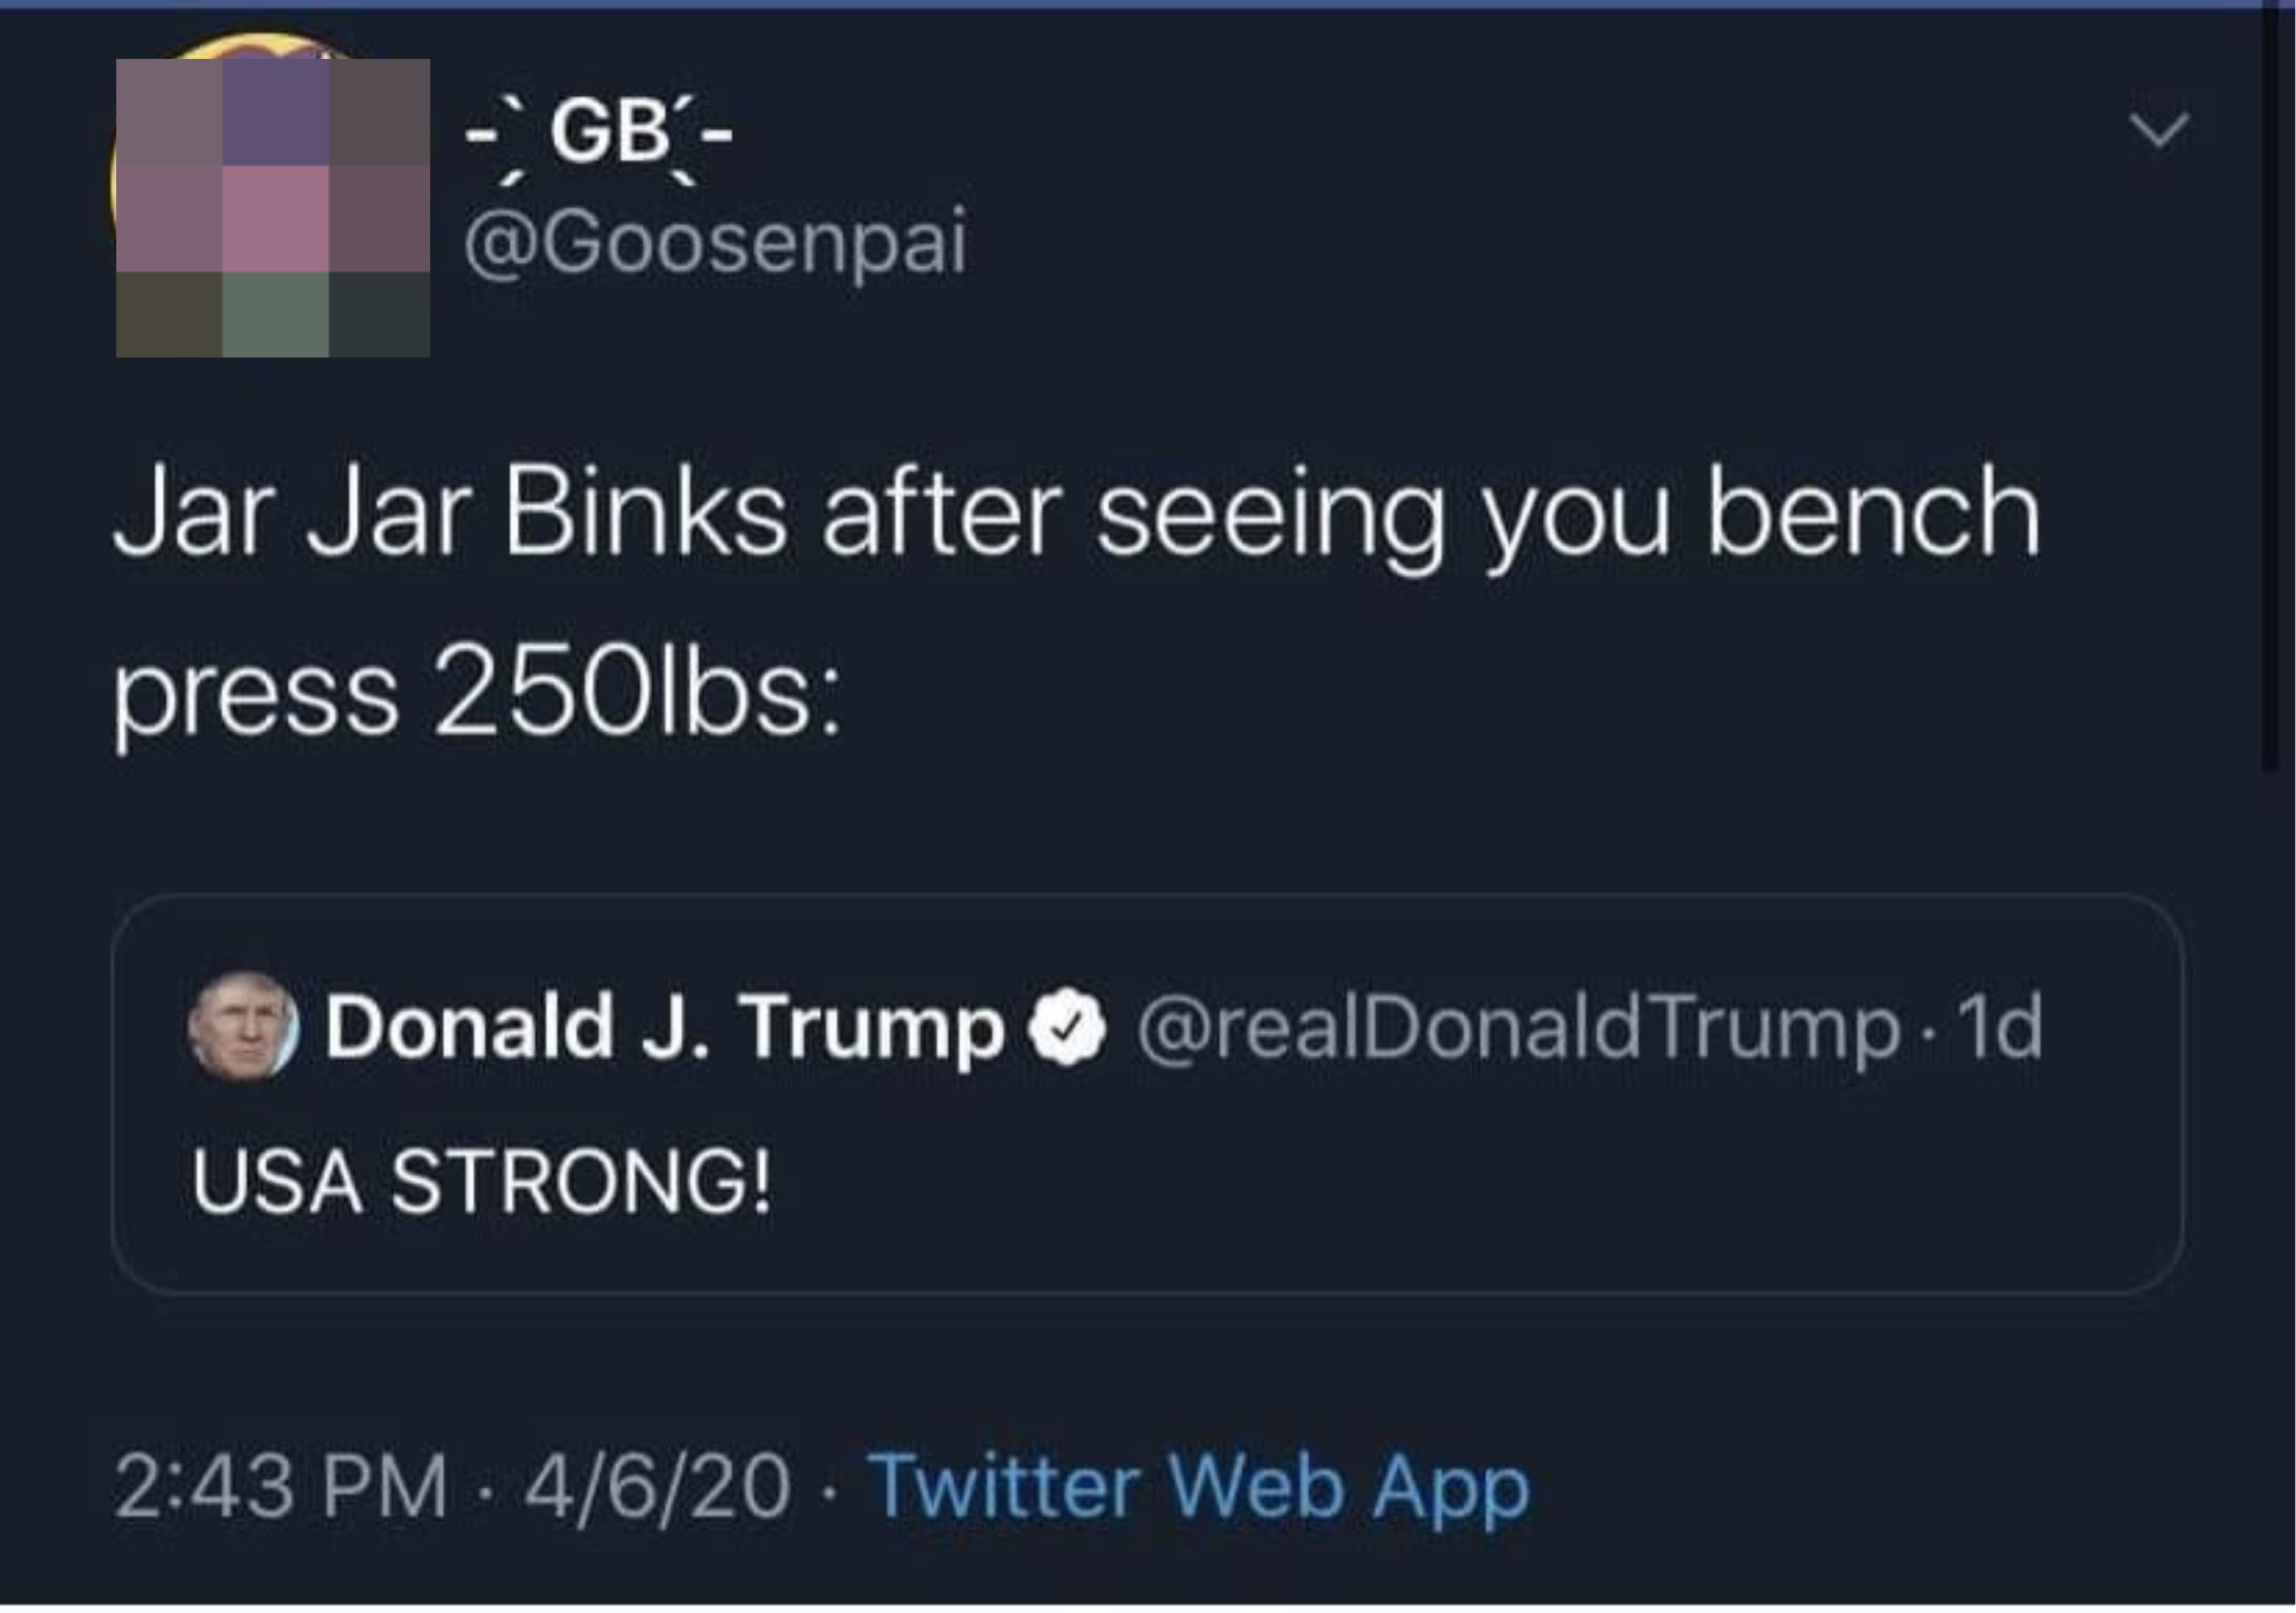 Donald Trump tweeting USA strong and someone saying it sounds like Jar Jar Binks in the gym